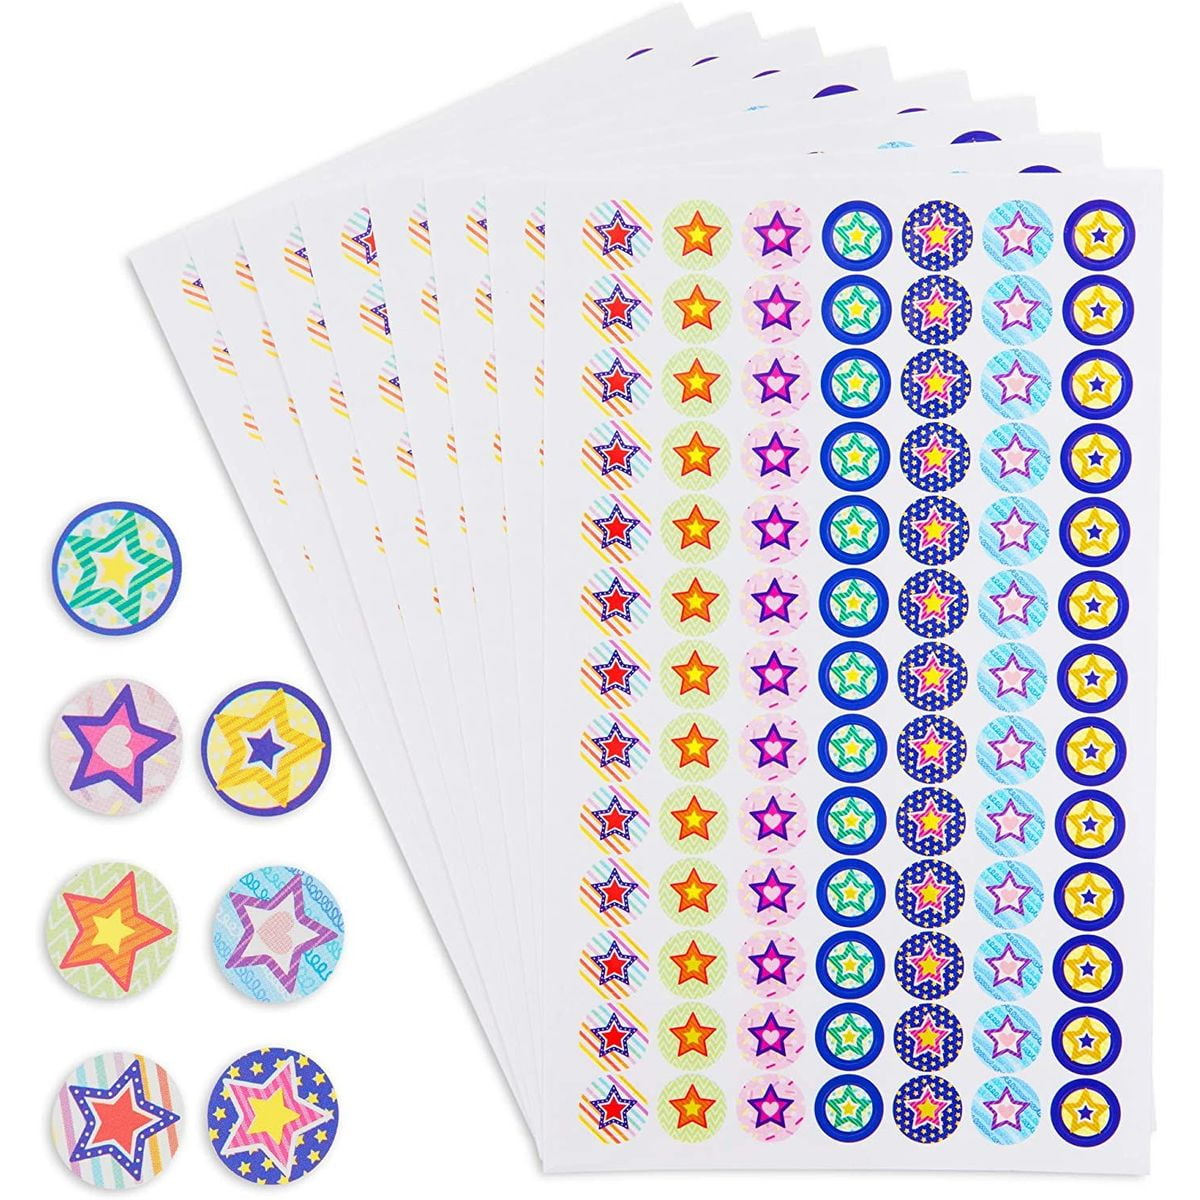 Star Stickers Kids Stationery (1 dozen) - Only $1.52 at Carnival Source